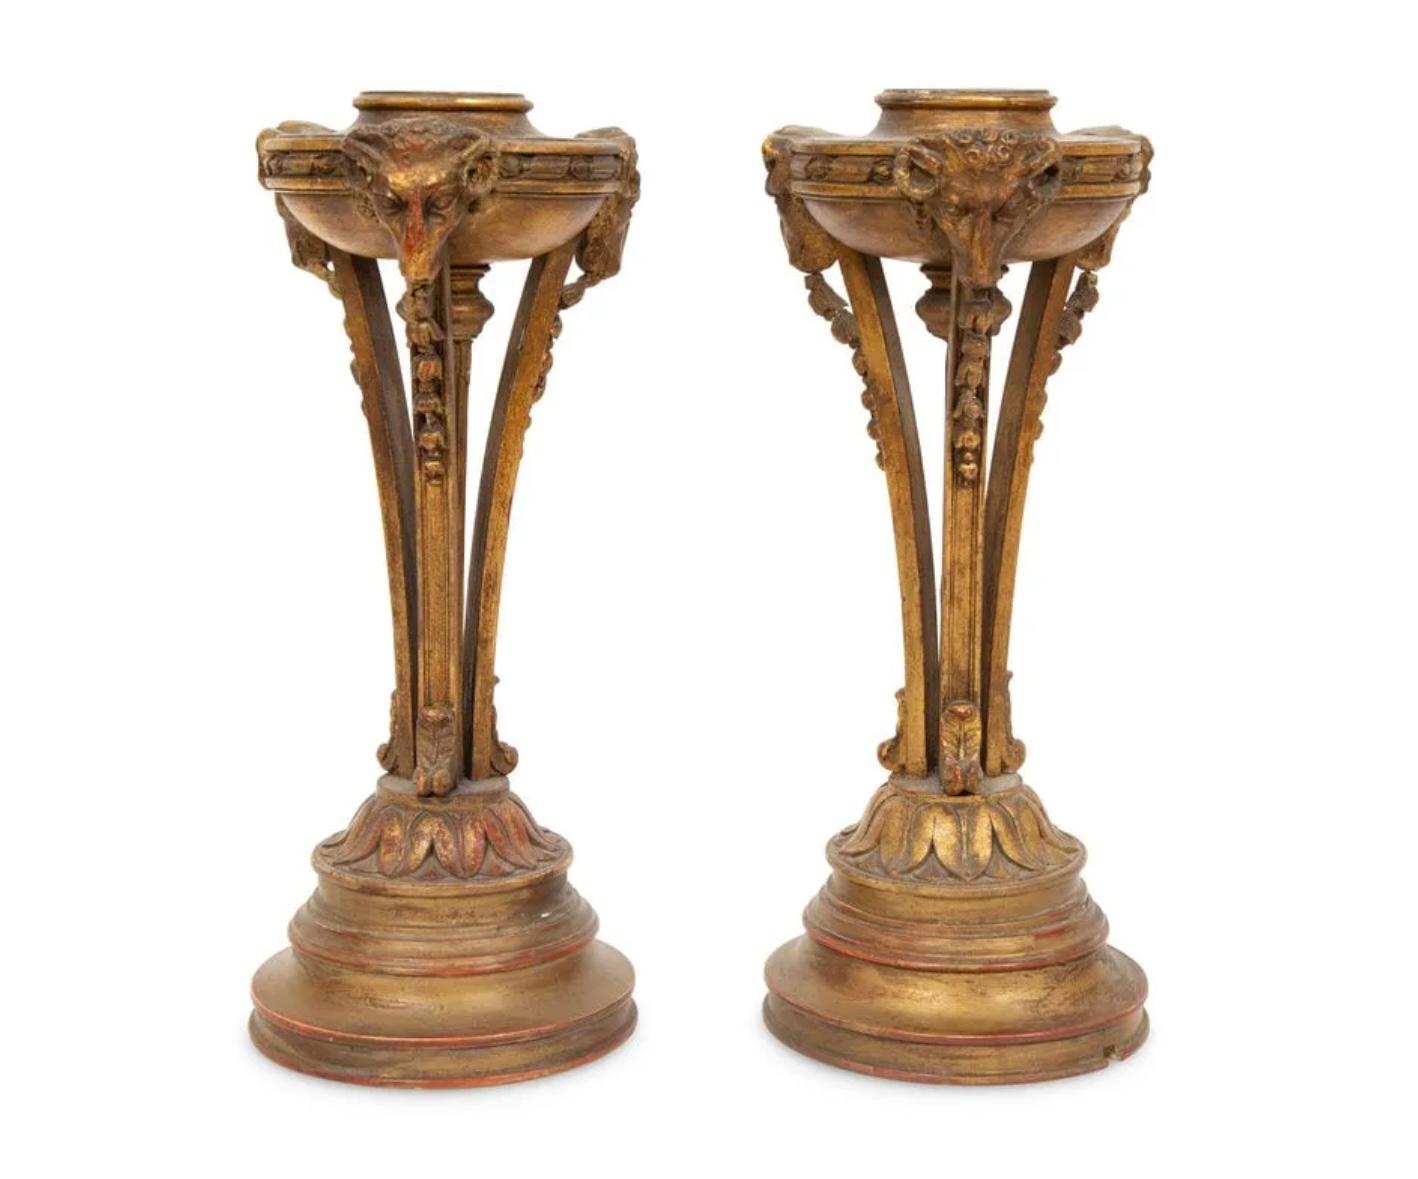 20th Century Pair of Regency Style Carved Giltwood Torchiere Lamp Bases For Sale